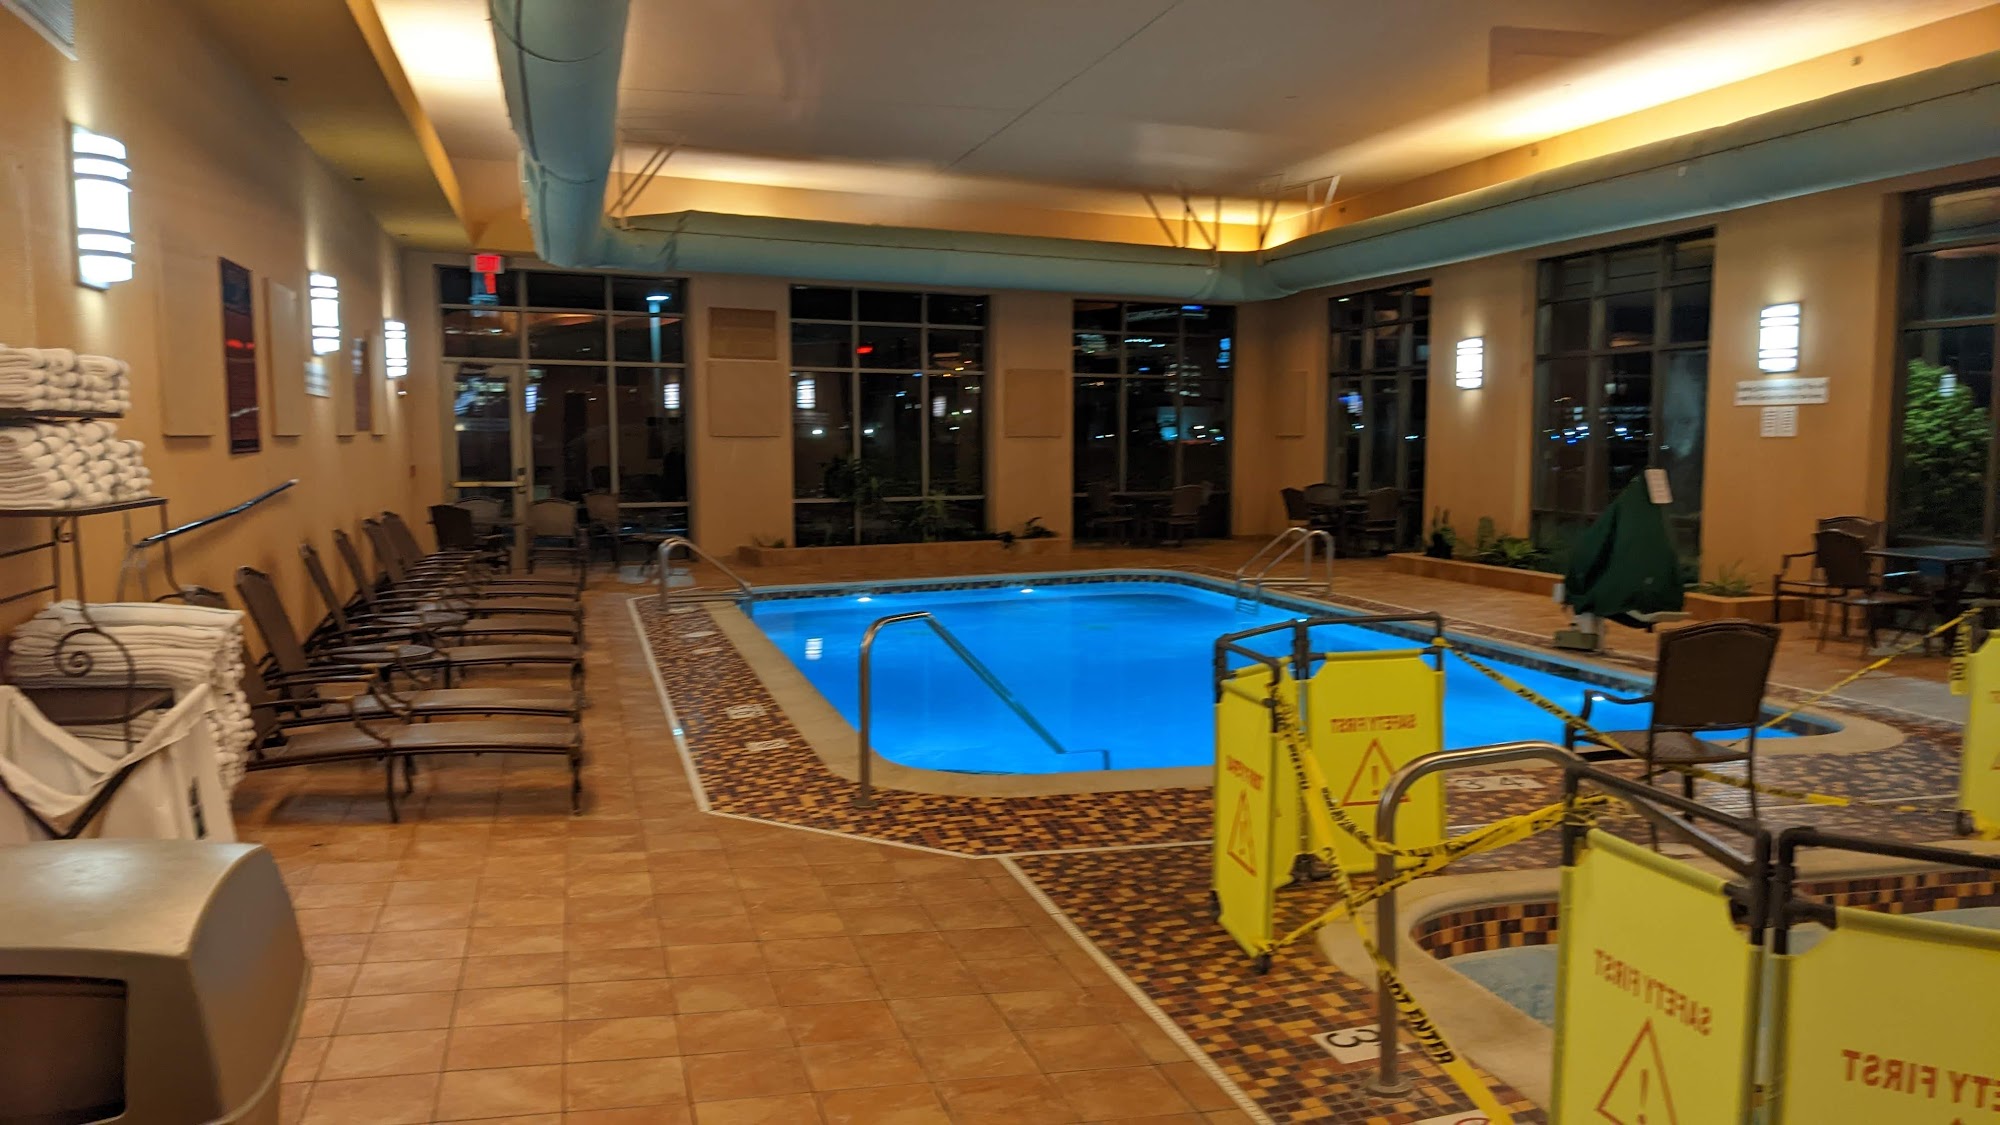 Embassy Suites by Hilton East Peoria Riverfront Hotel & Conference Center